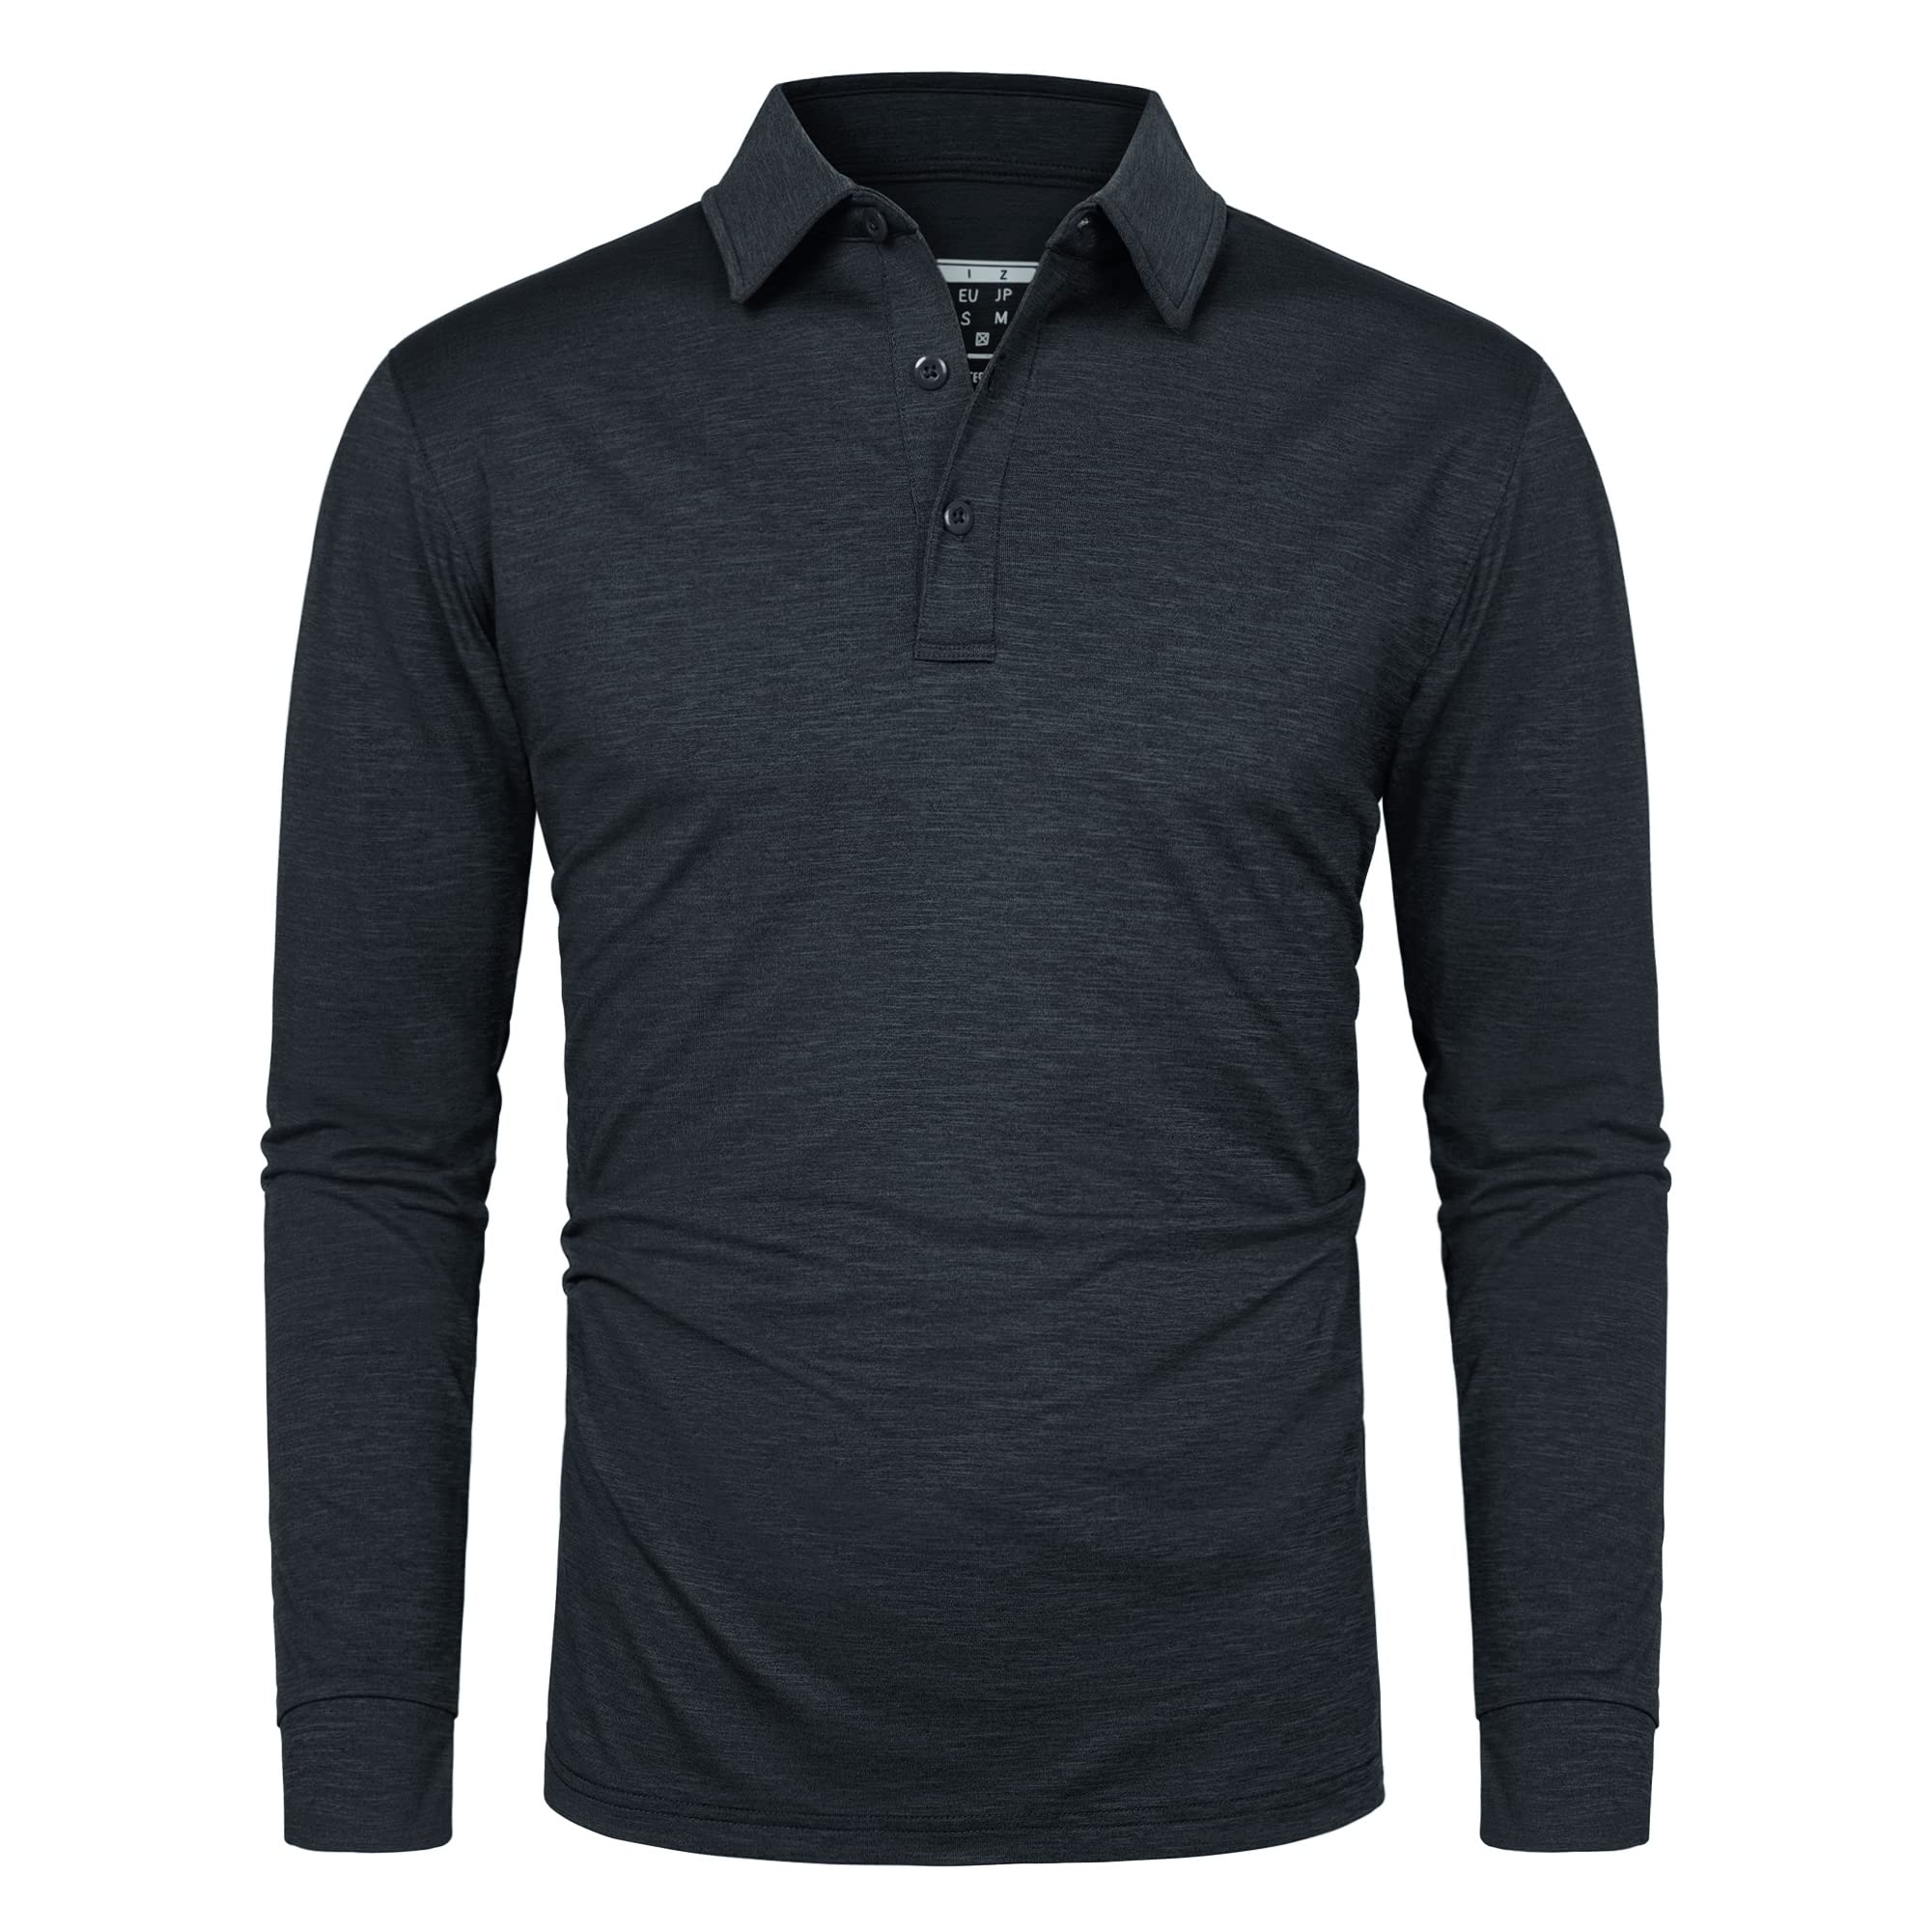 Soft Polyester Golf Polo Long Sleeve Shirt in black